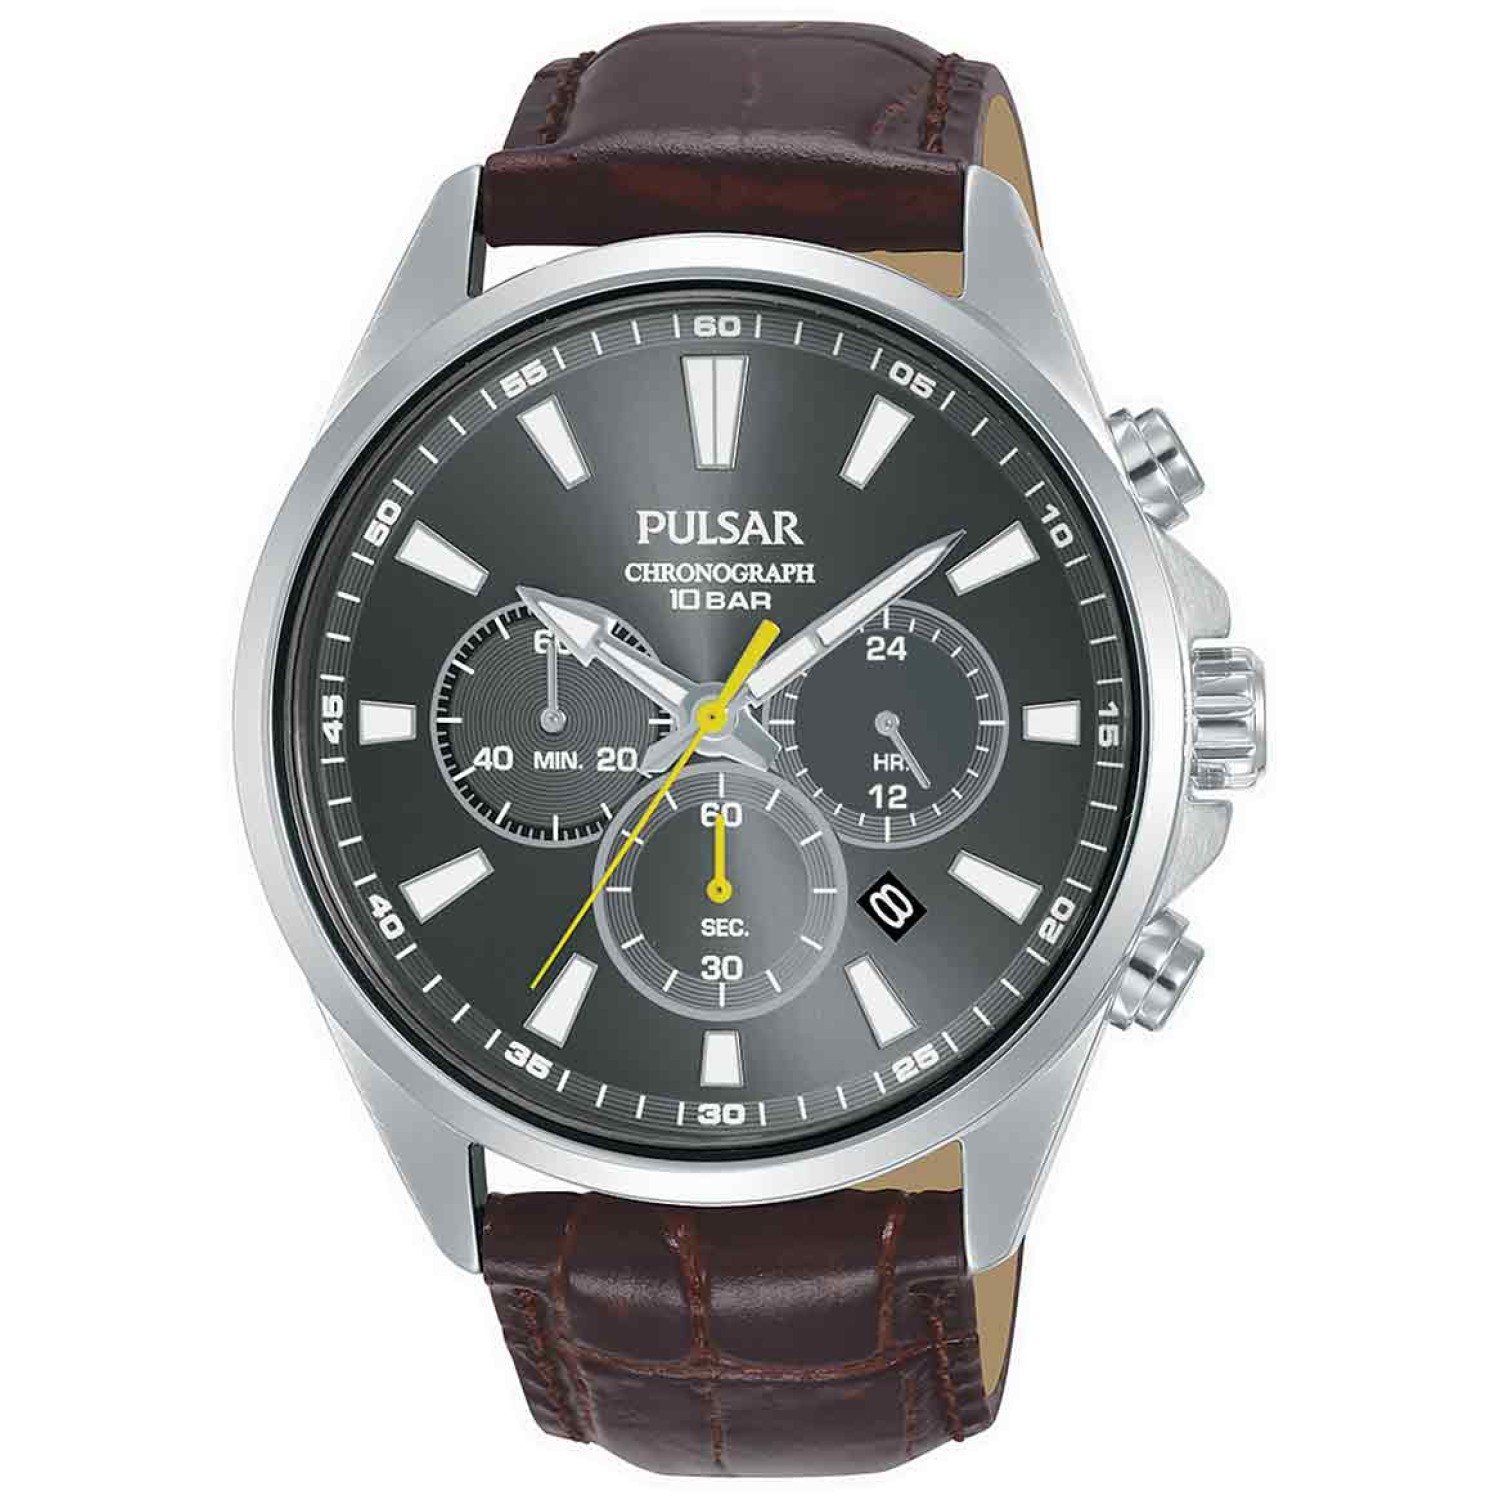 PT3A41X1 PULSAR Chronograph by Seiko Watch. Pulsar Mens 100 metres Stainless Steel Chronograph watch with 100 metres water resistance and a date readout Humm -Buy Little things up to $1000 and choose 10 weekly or 5 fortnightly payments with no interest. L